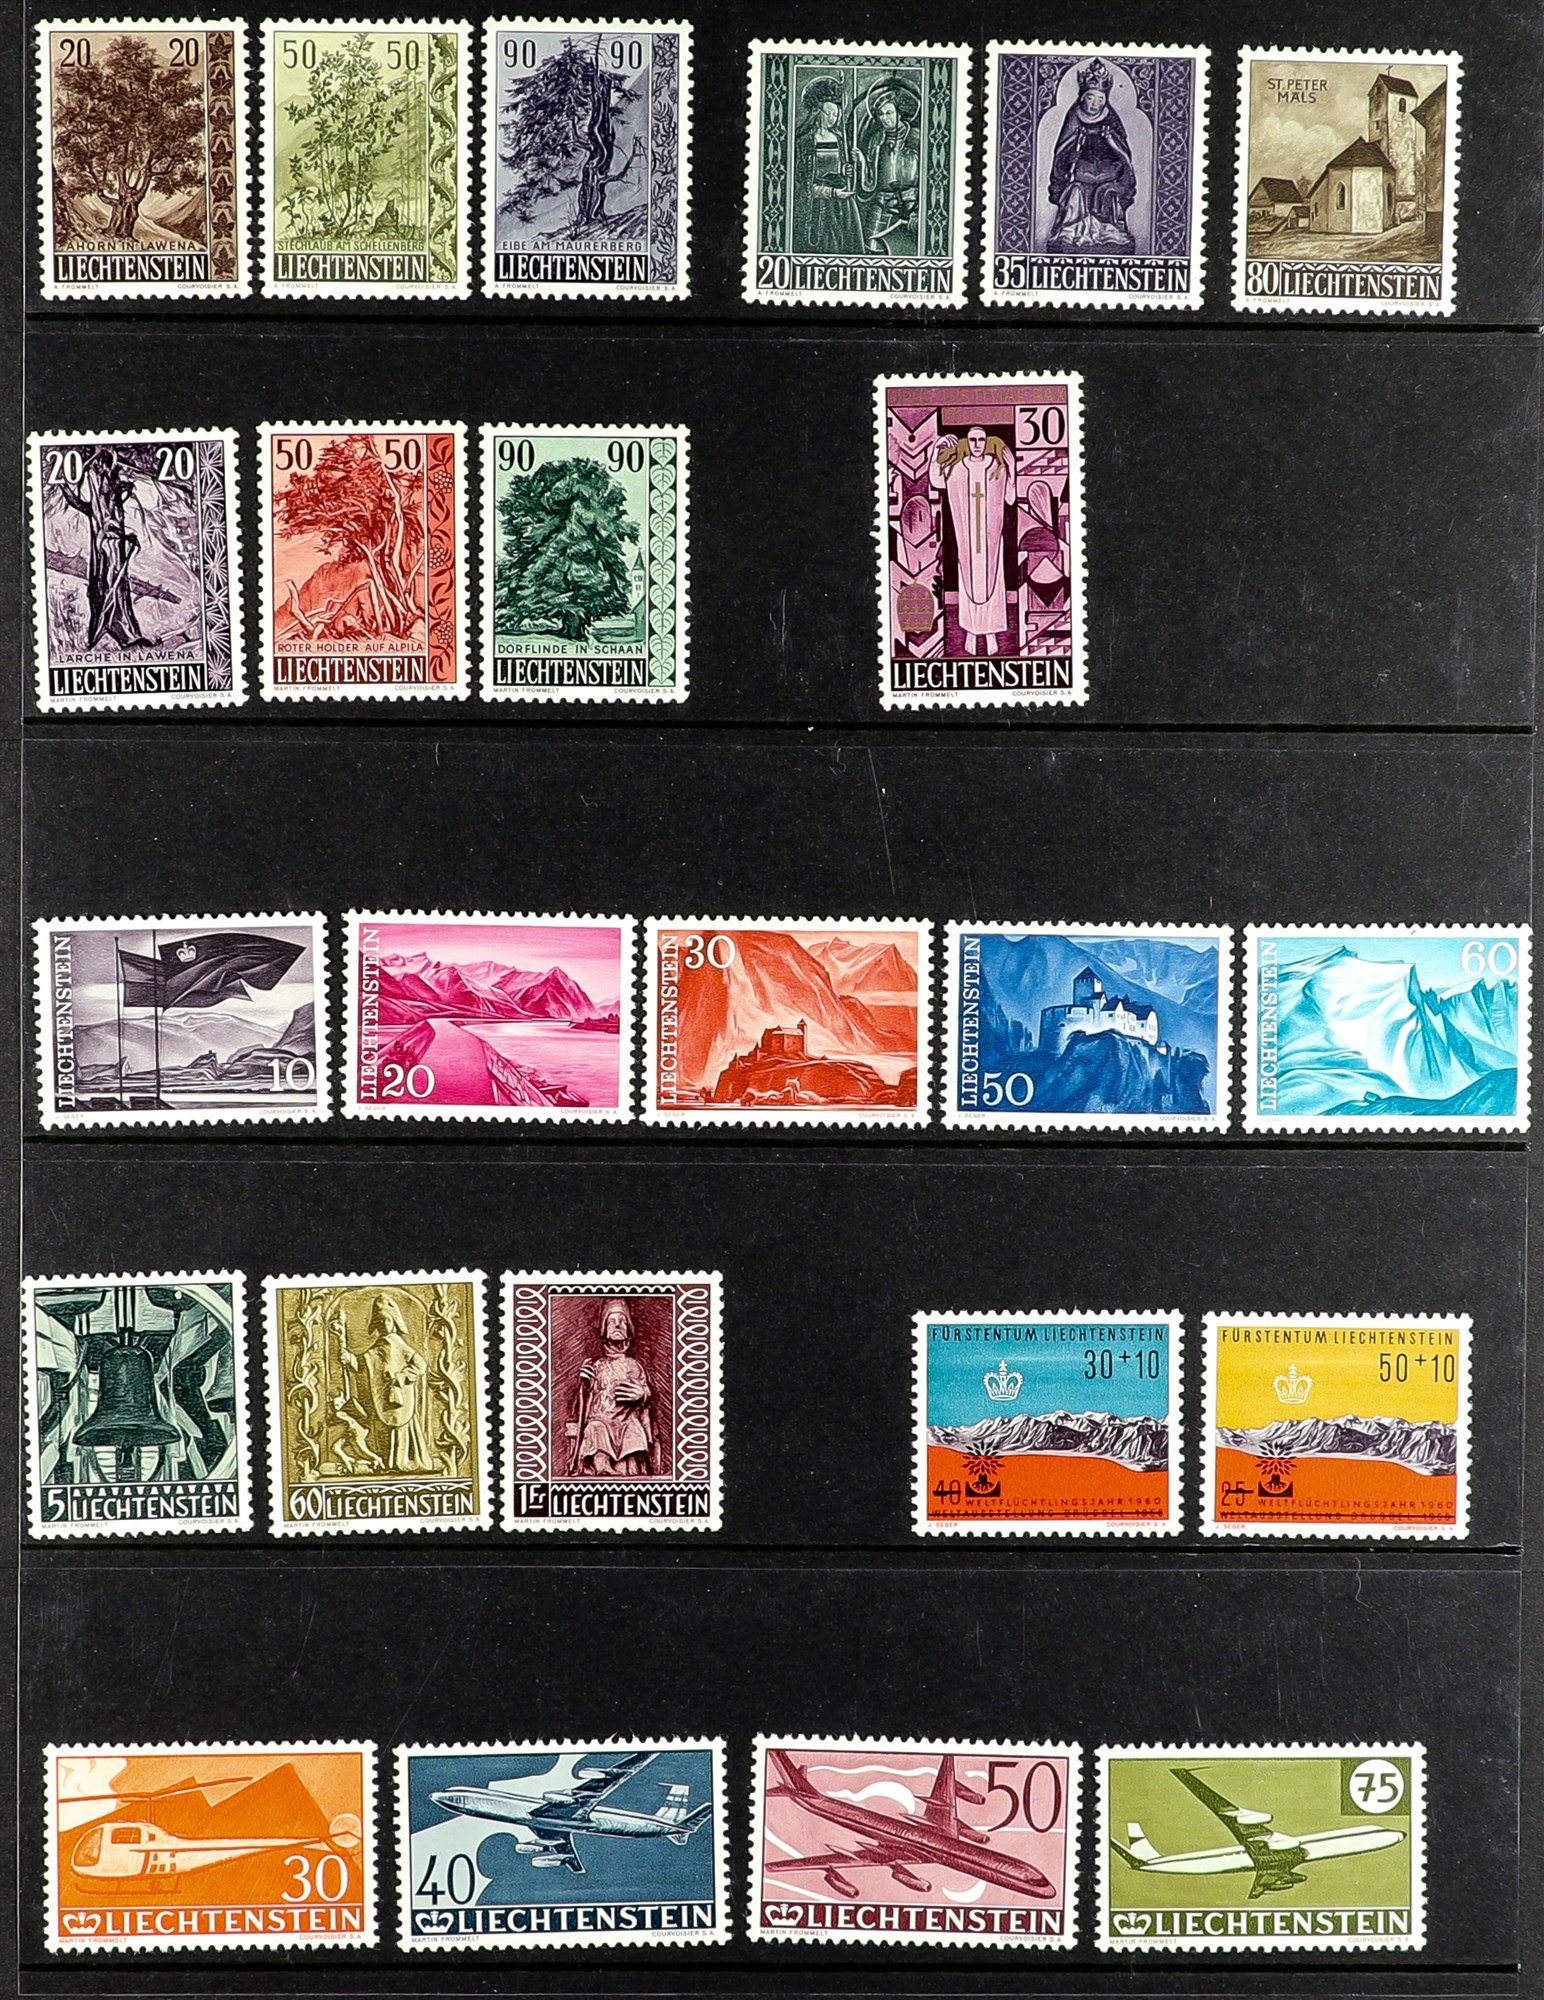 LIECHTENSTEIN 1938 - 1993 COLLECTION of 650+ never hinged mint stamps & 15 miniature sheets on - Image 7 of 11